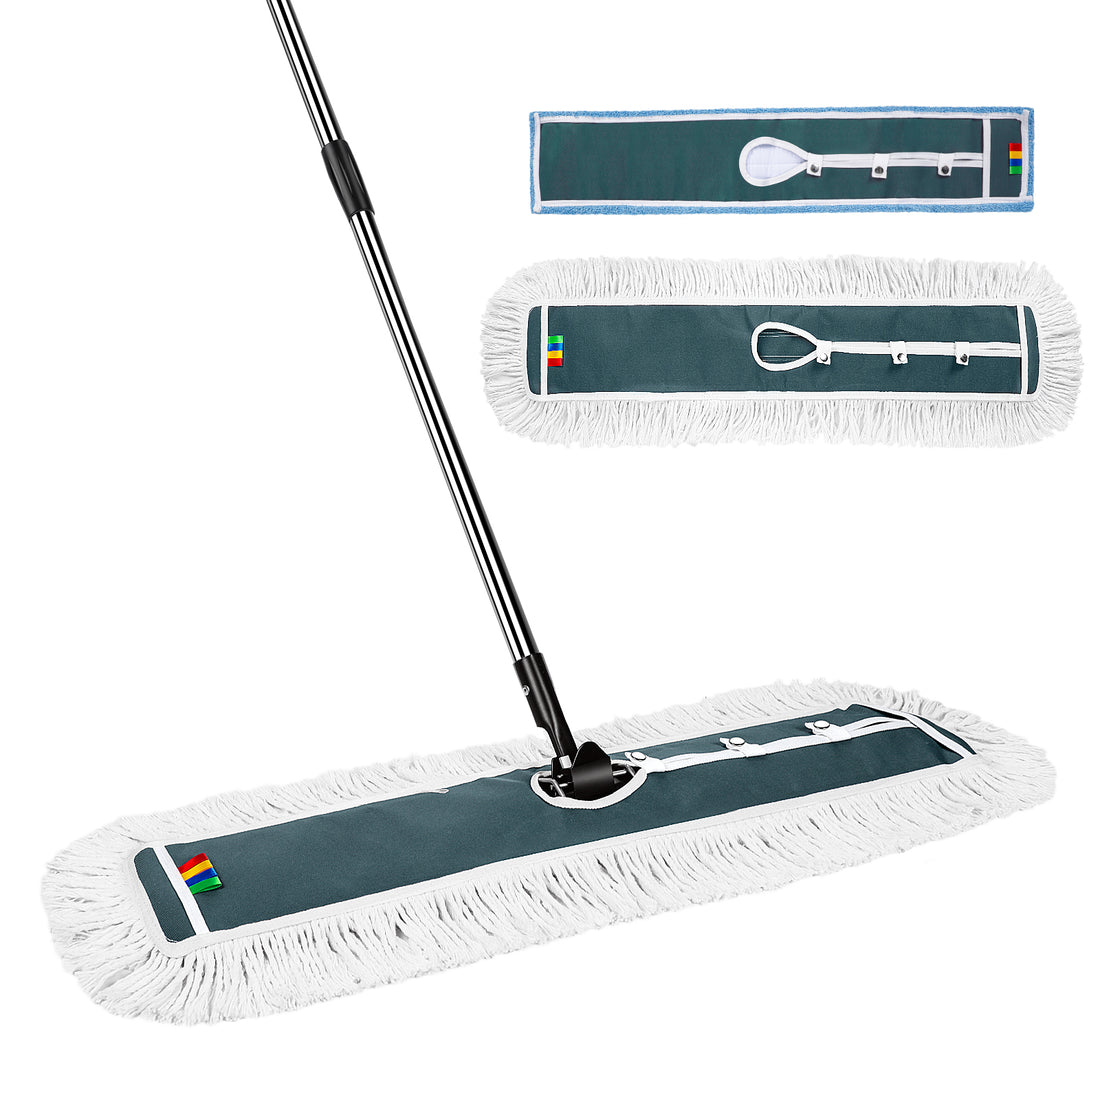 Industrial mop, Commercial Mop Suitable for Hospitals and Shopping Malls, Large Floor Mop with 3 pads